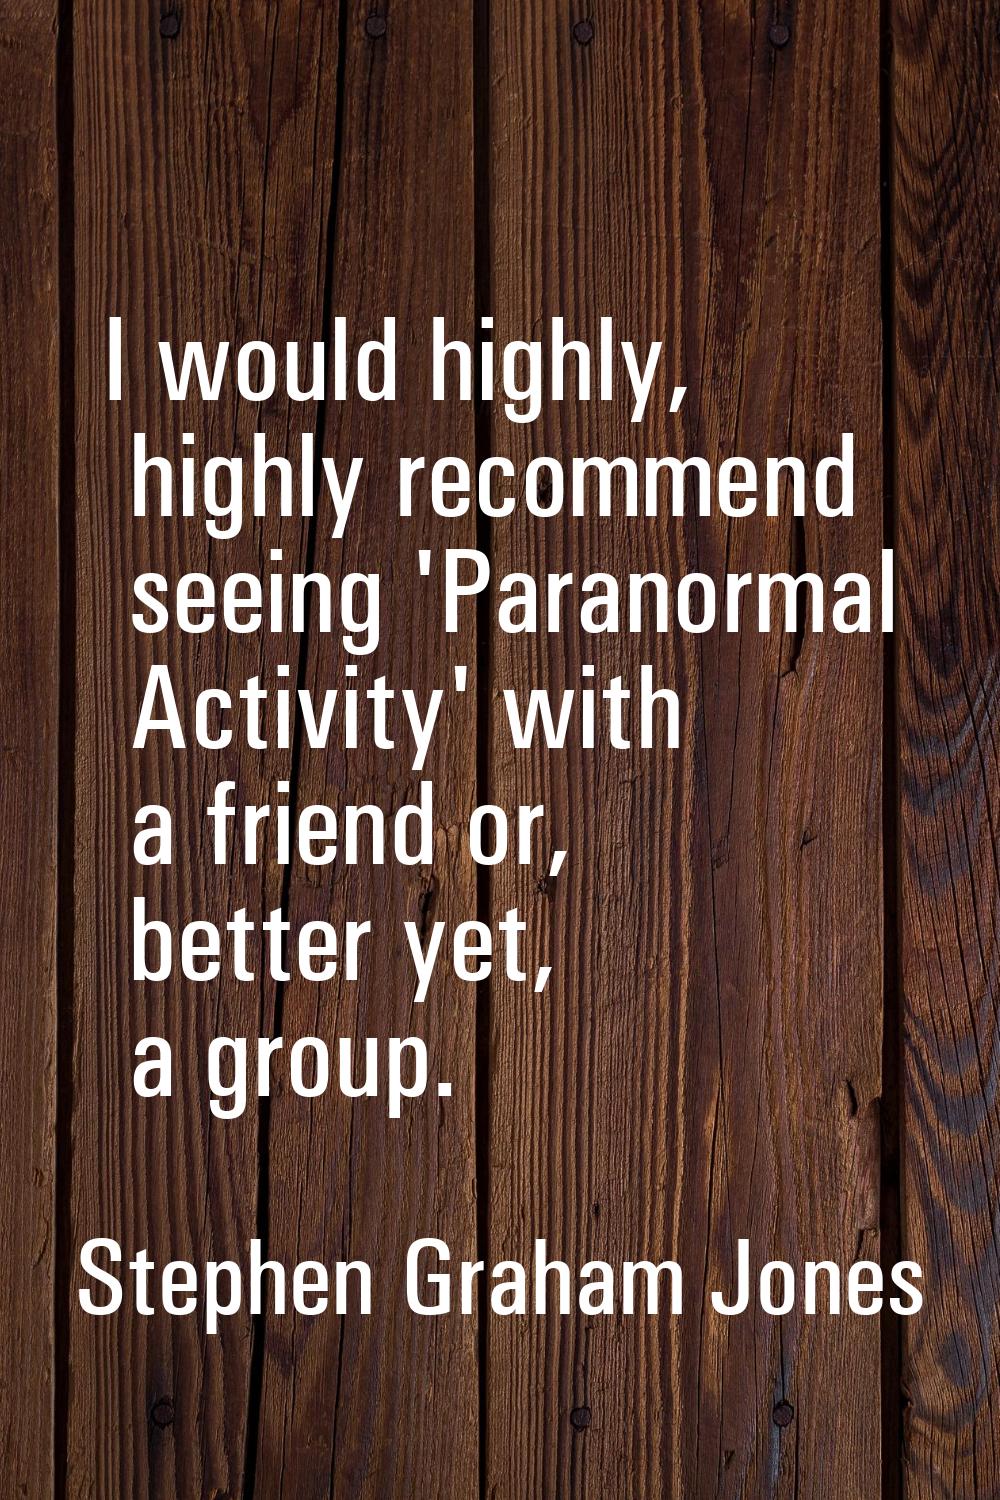 I would highly, highly recommend seeing 'Paranormal Activity' with a friend or, better yet, a group